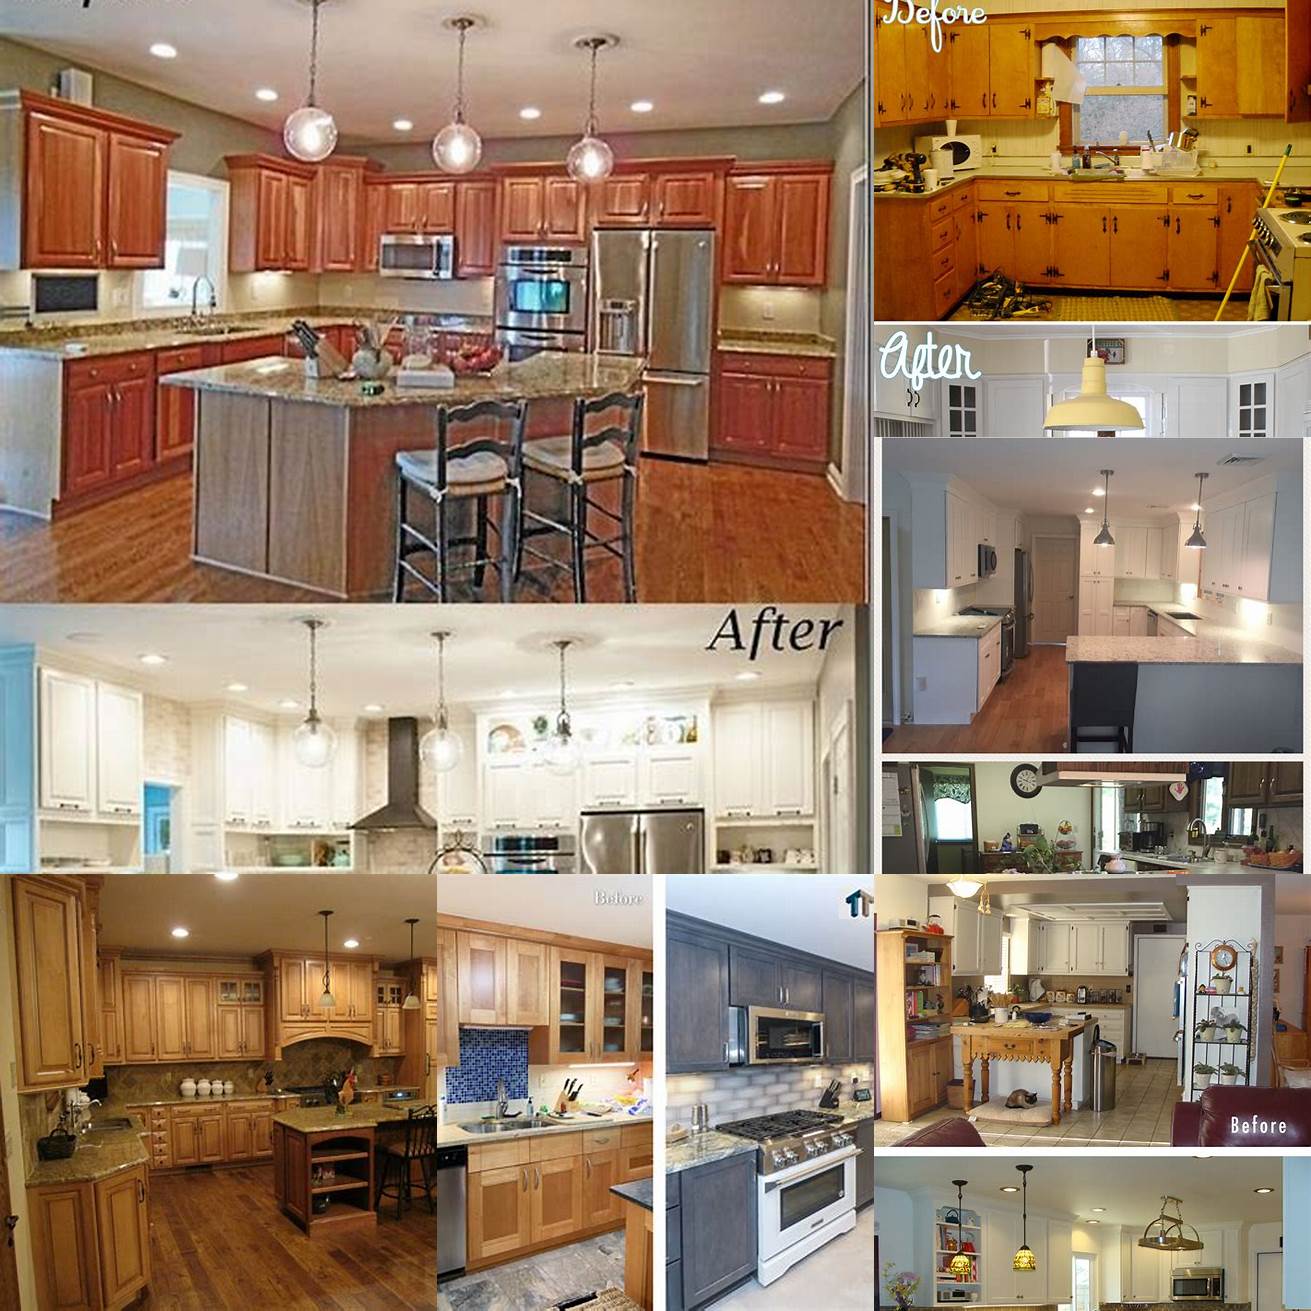 Before and after photos of Amish kitchen cabinet remodels